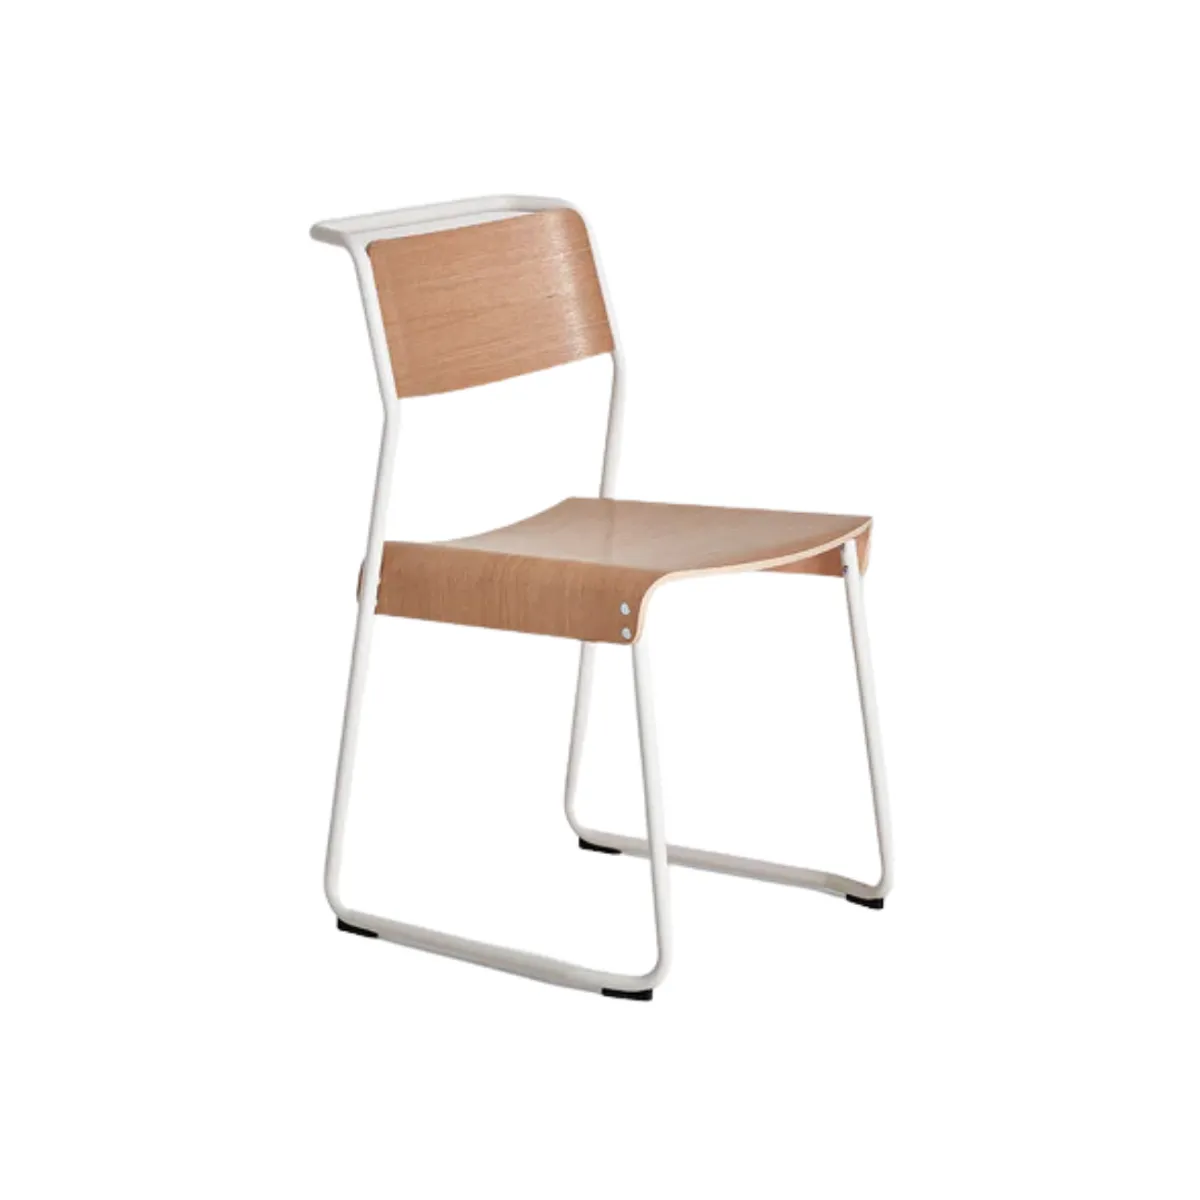 Utility side chair 3